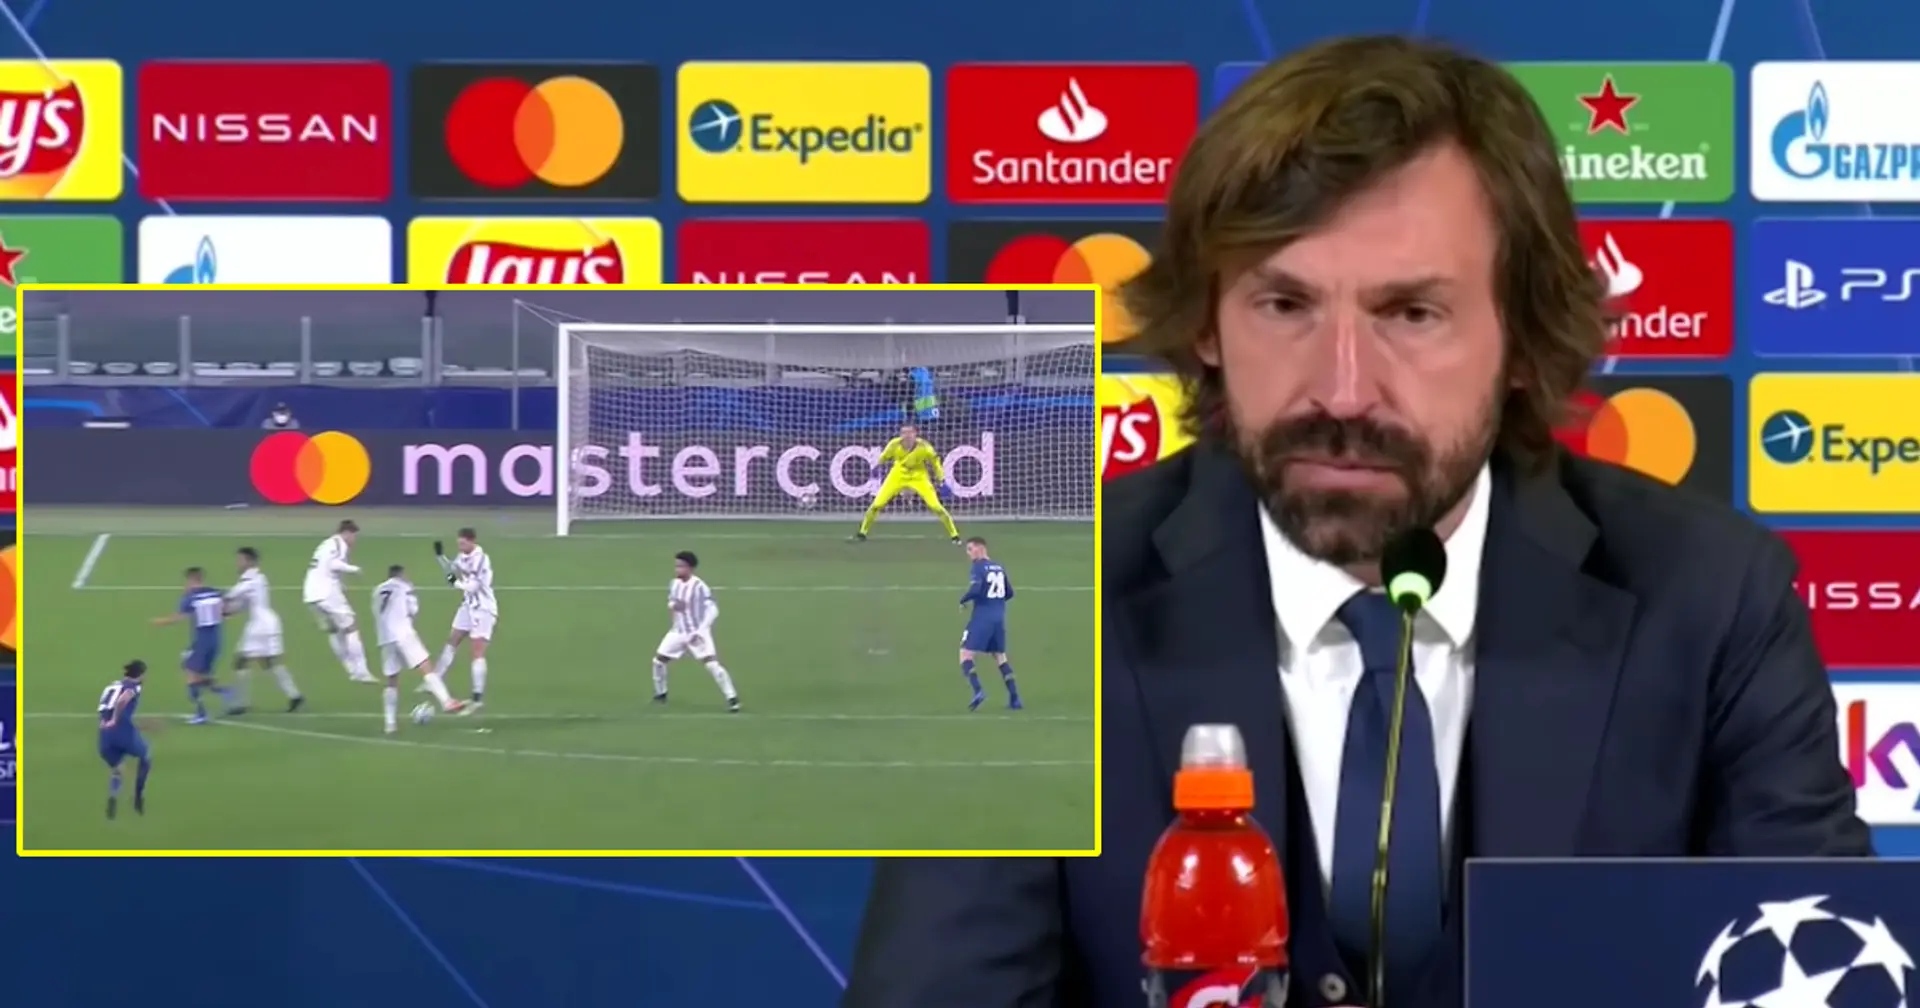 Pirlo reacts to Ronaldo's bad defending free-kick as Porto knocked Juve out of Champions League